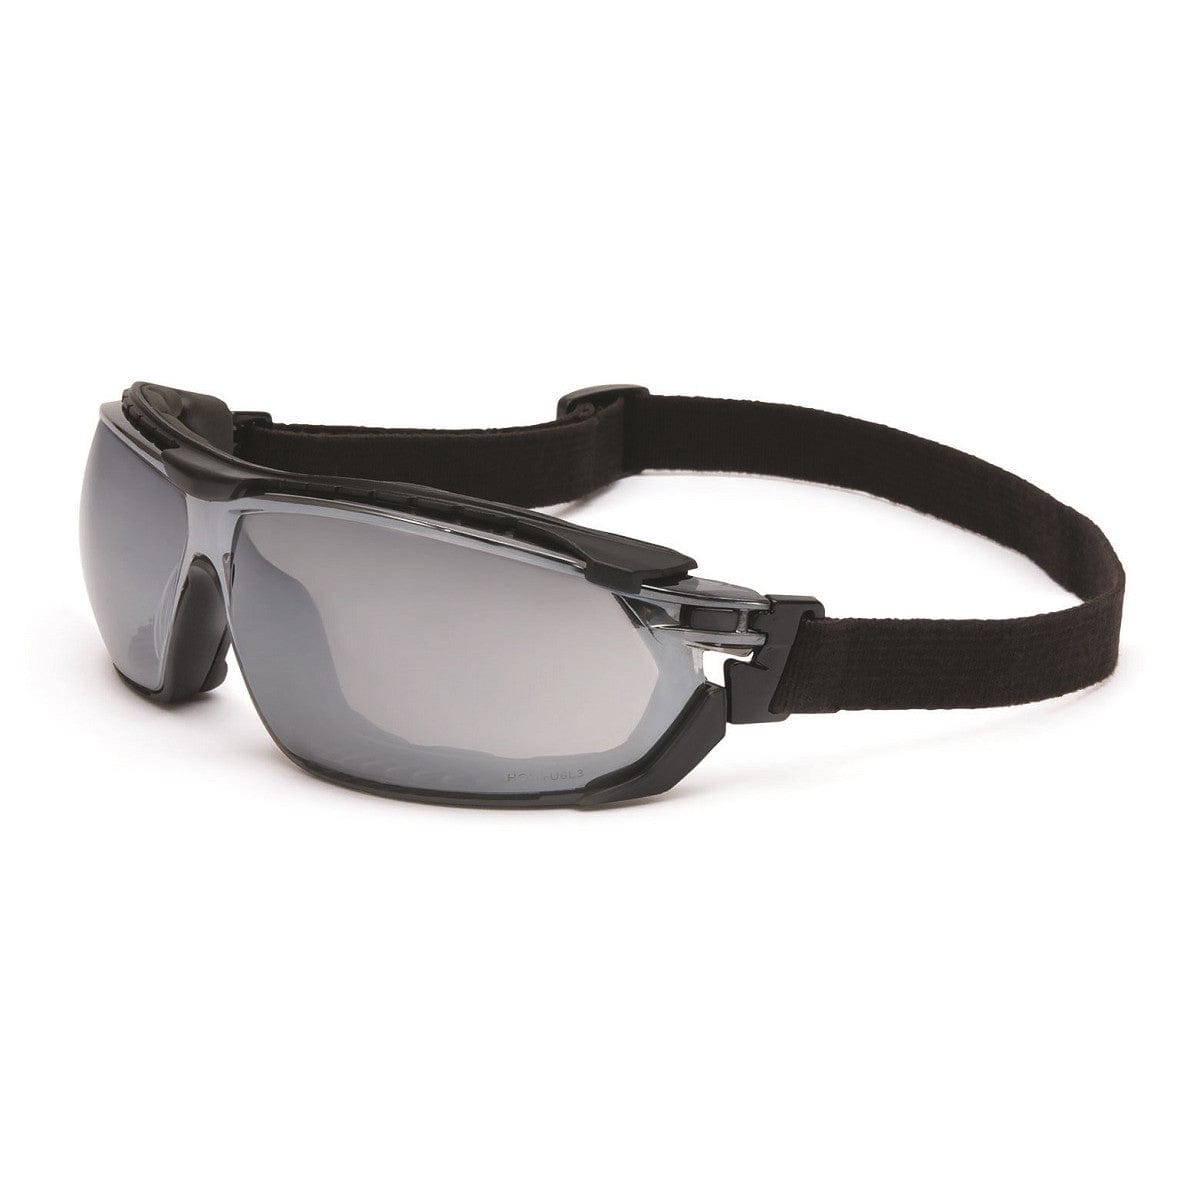 Uvex Tirade Safety Glasses Indoor/Outdoor Anti-Fog Lens with Goggle Strap Installed